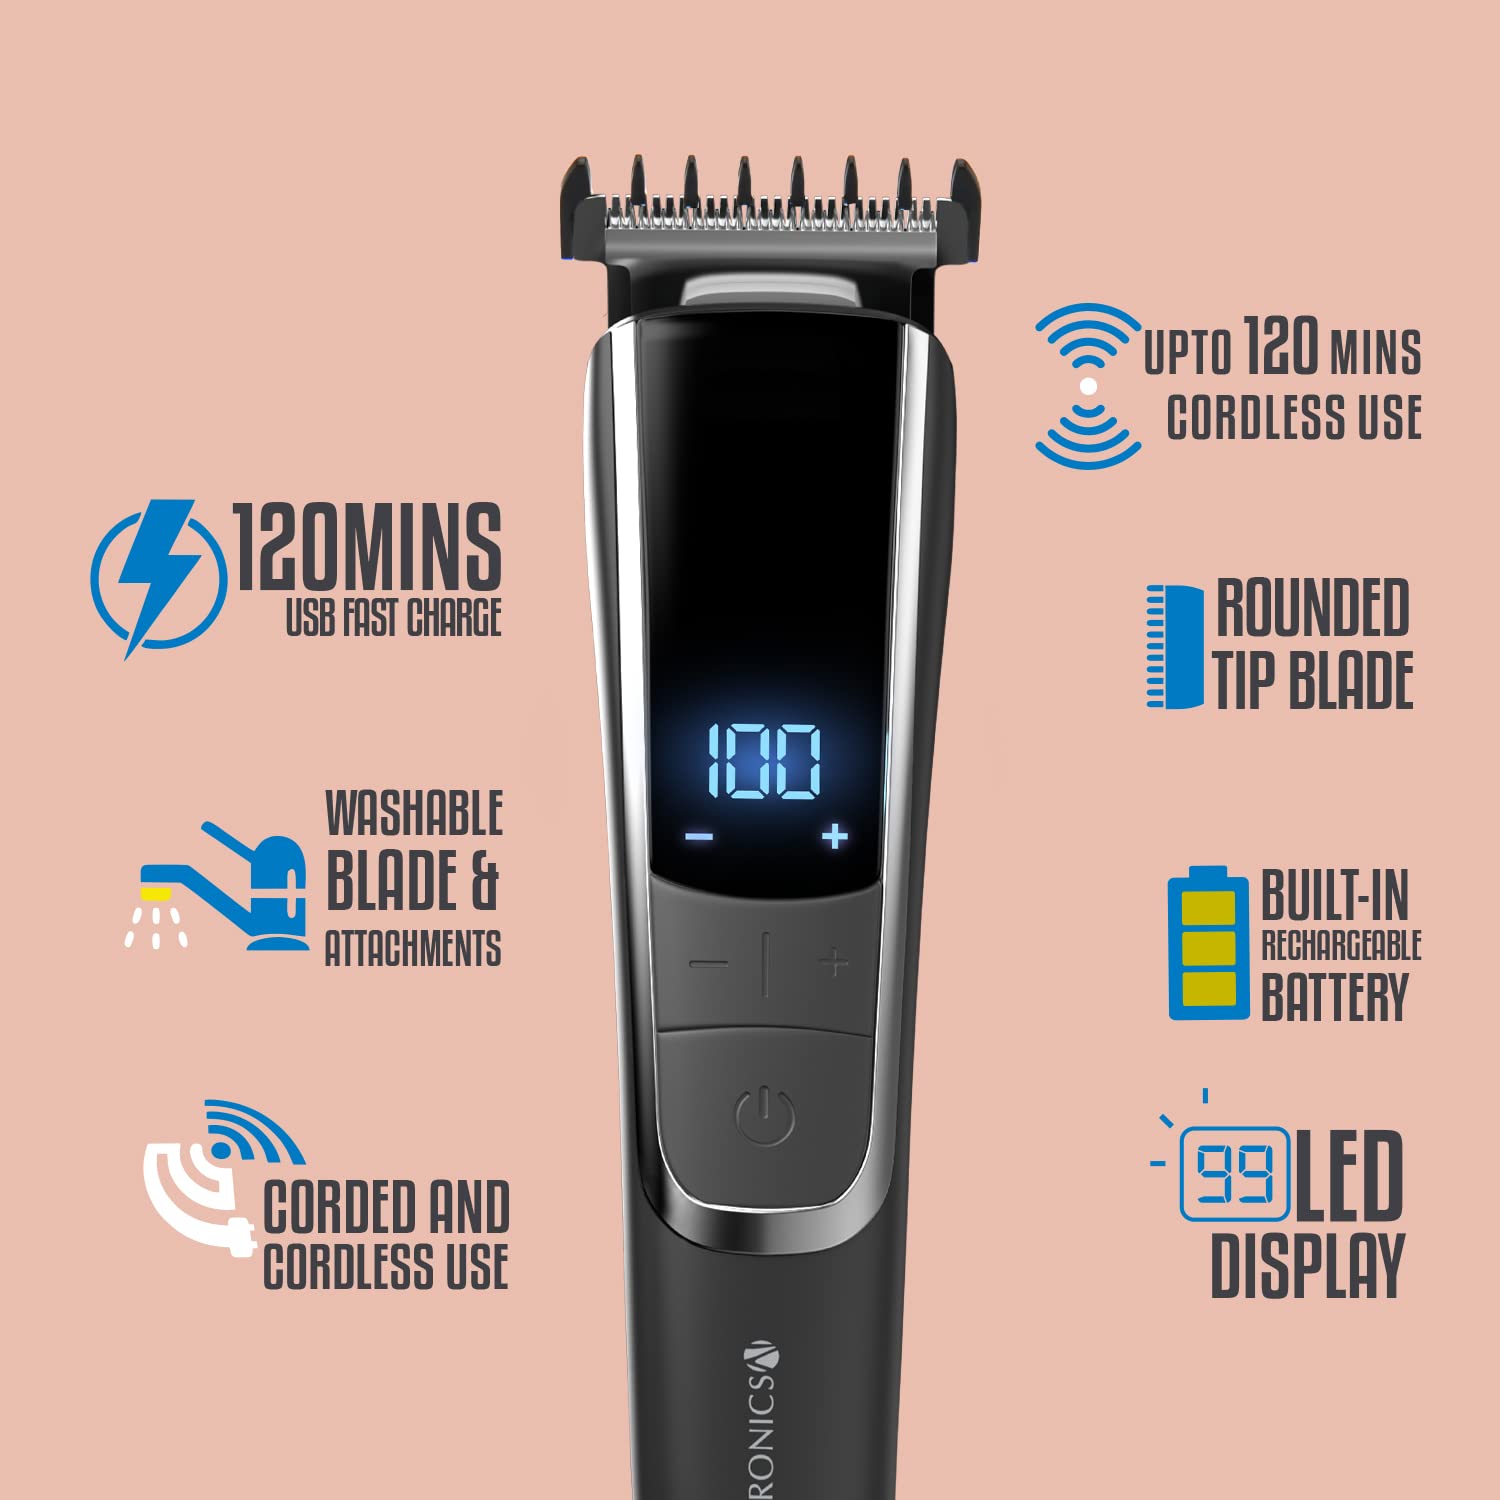 Zebronics ZEB-HT102 Cordless/Cord use Trimmer with up to 120mins backup, USB fast charge, LED display, 3 speed modes, Rounded tip stainless steel blade, 4 guide combs, Washable attachments and ABS(Black)-Trimmer-dealsplant